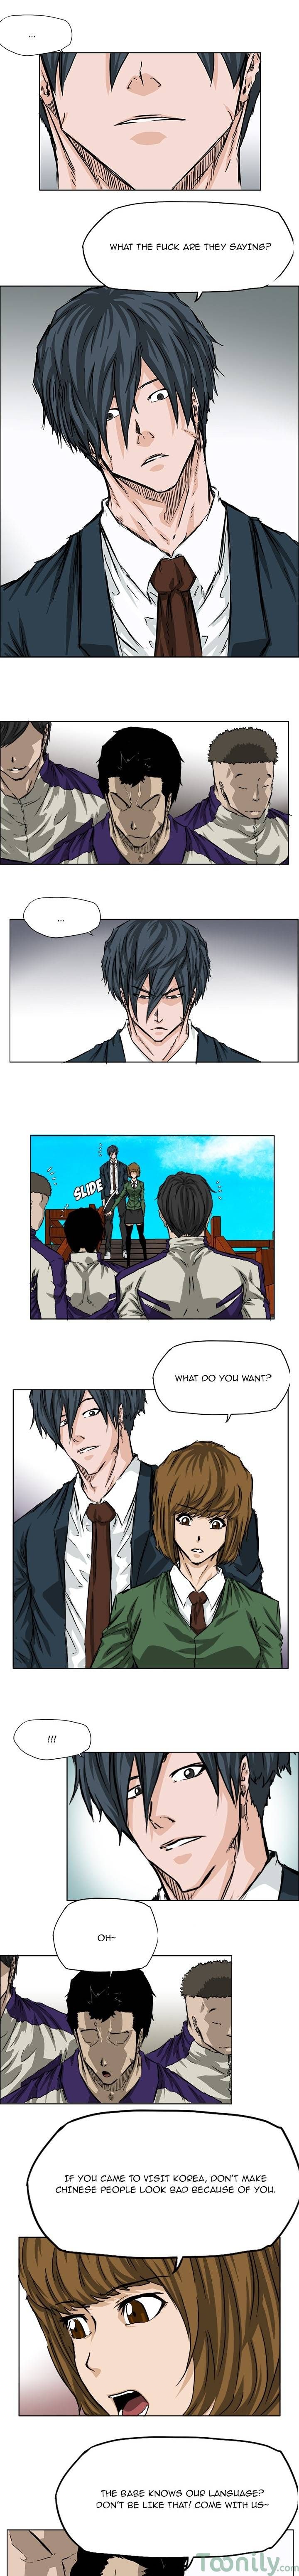 Boss in School Chapter 35 page 1